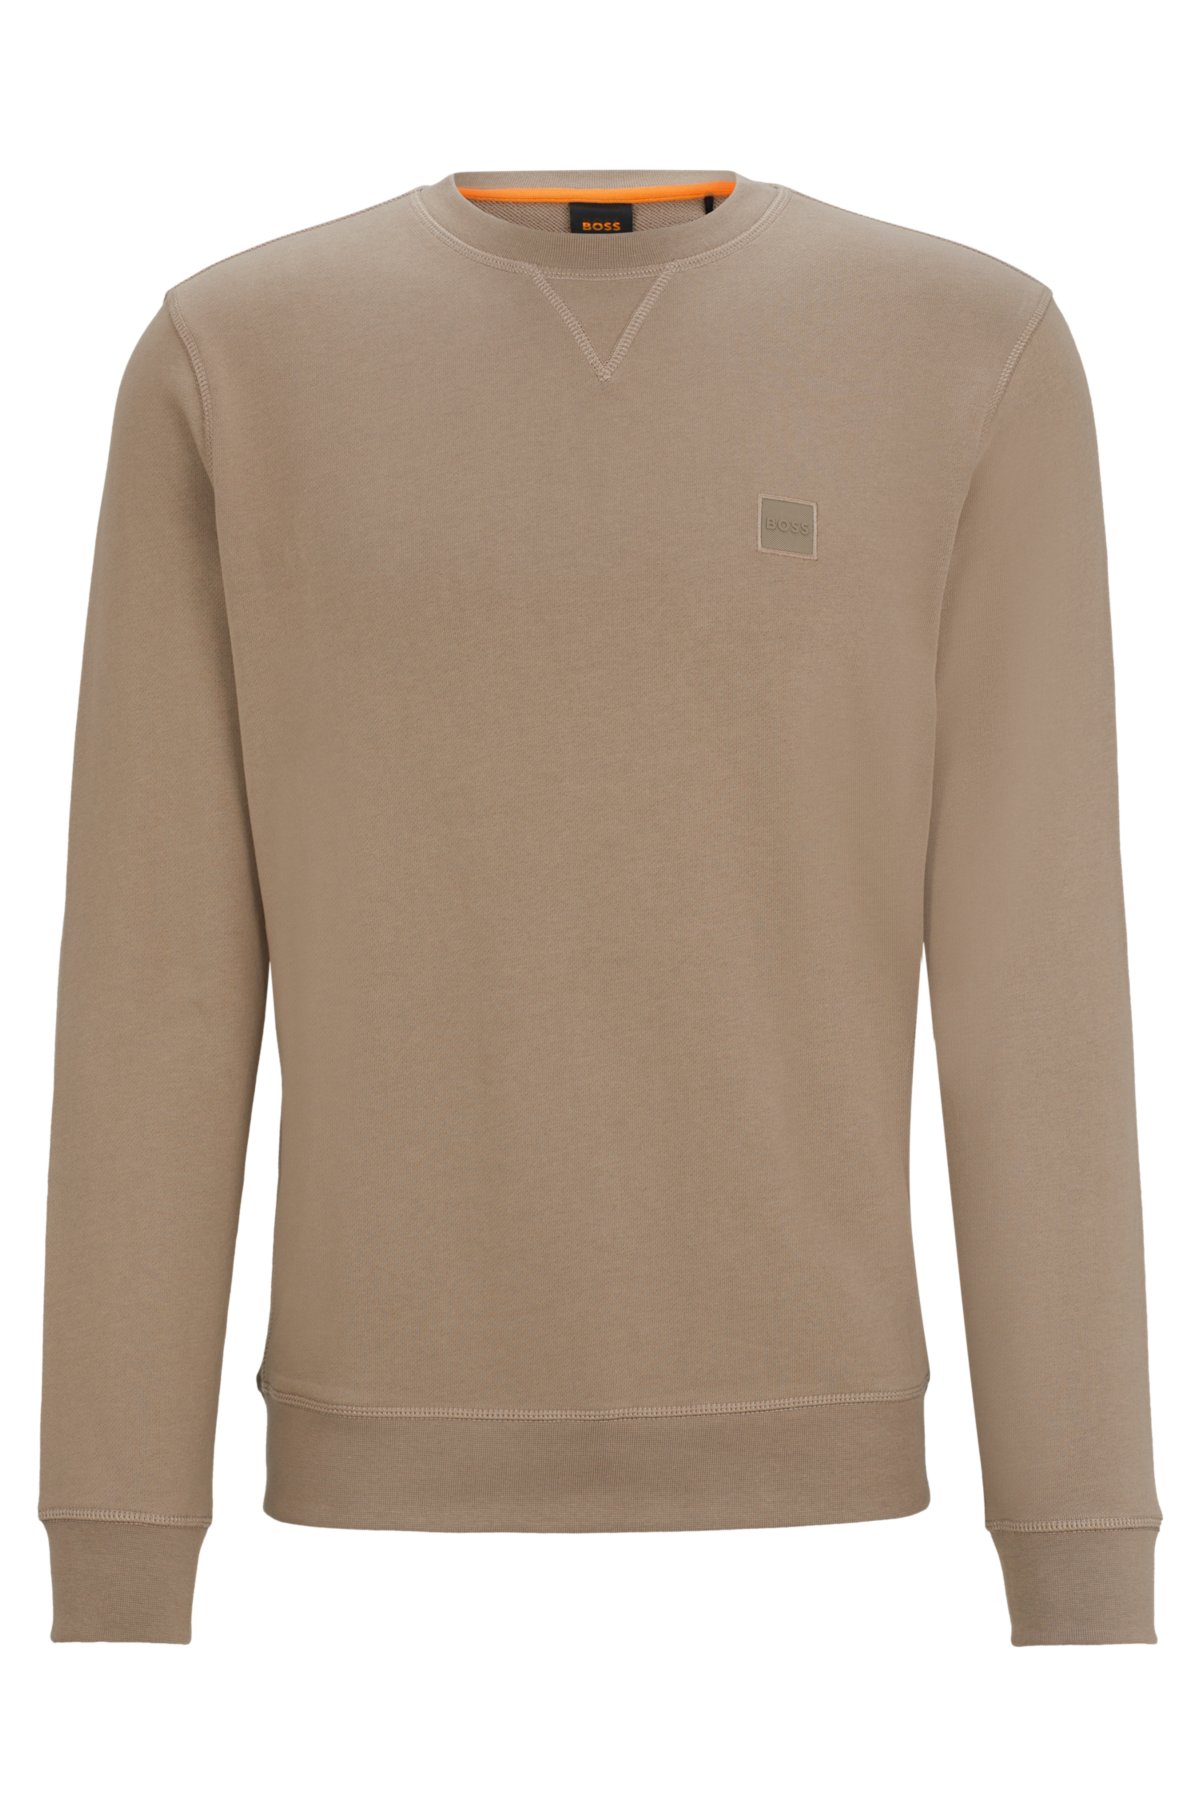 Cotton-terry relaxed-fit sweatshirt with logo patch, Light Brown